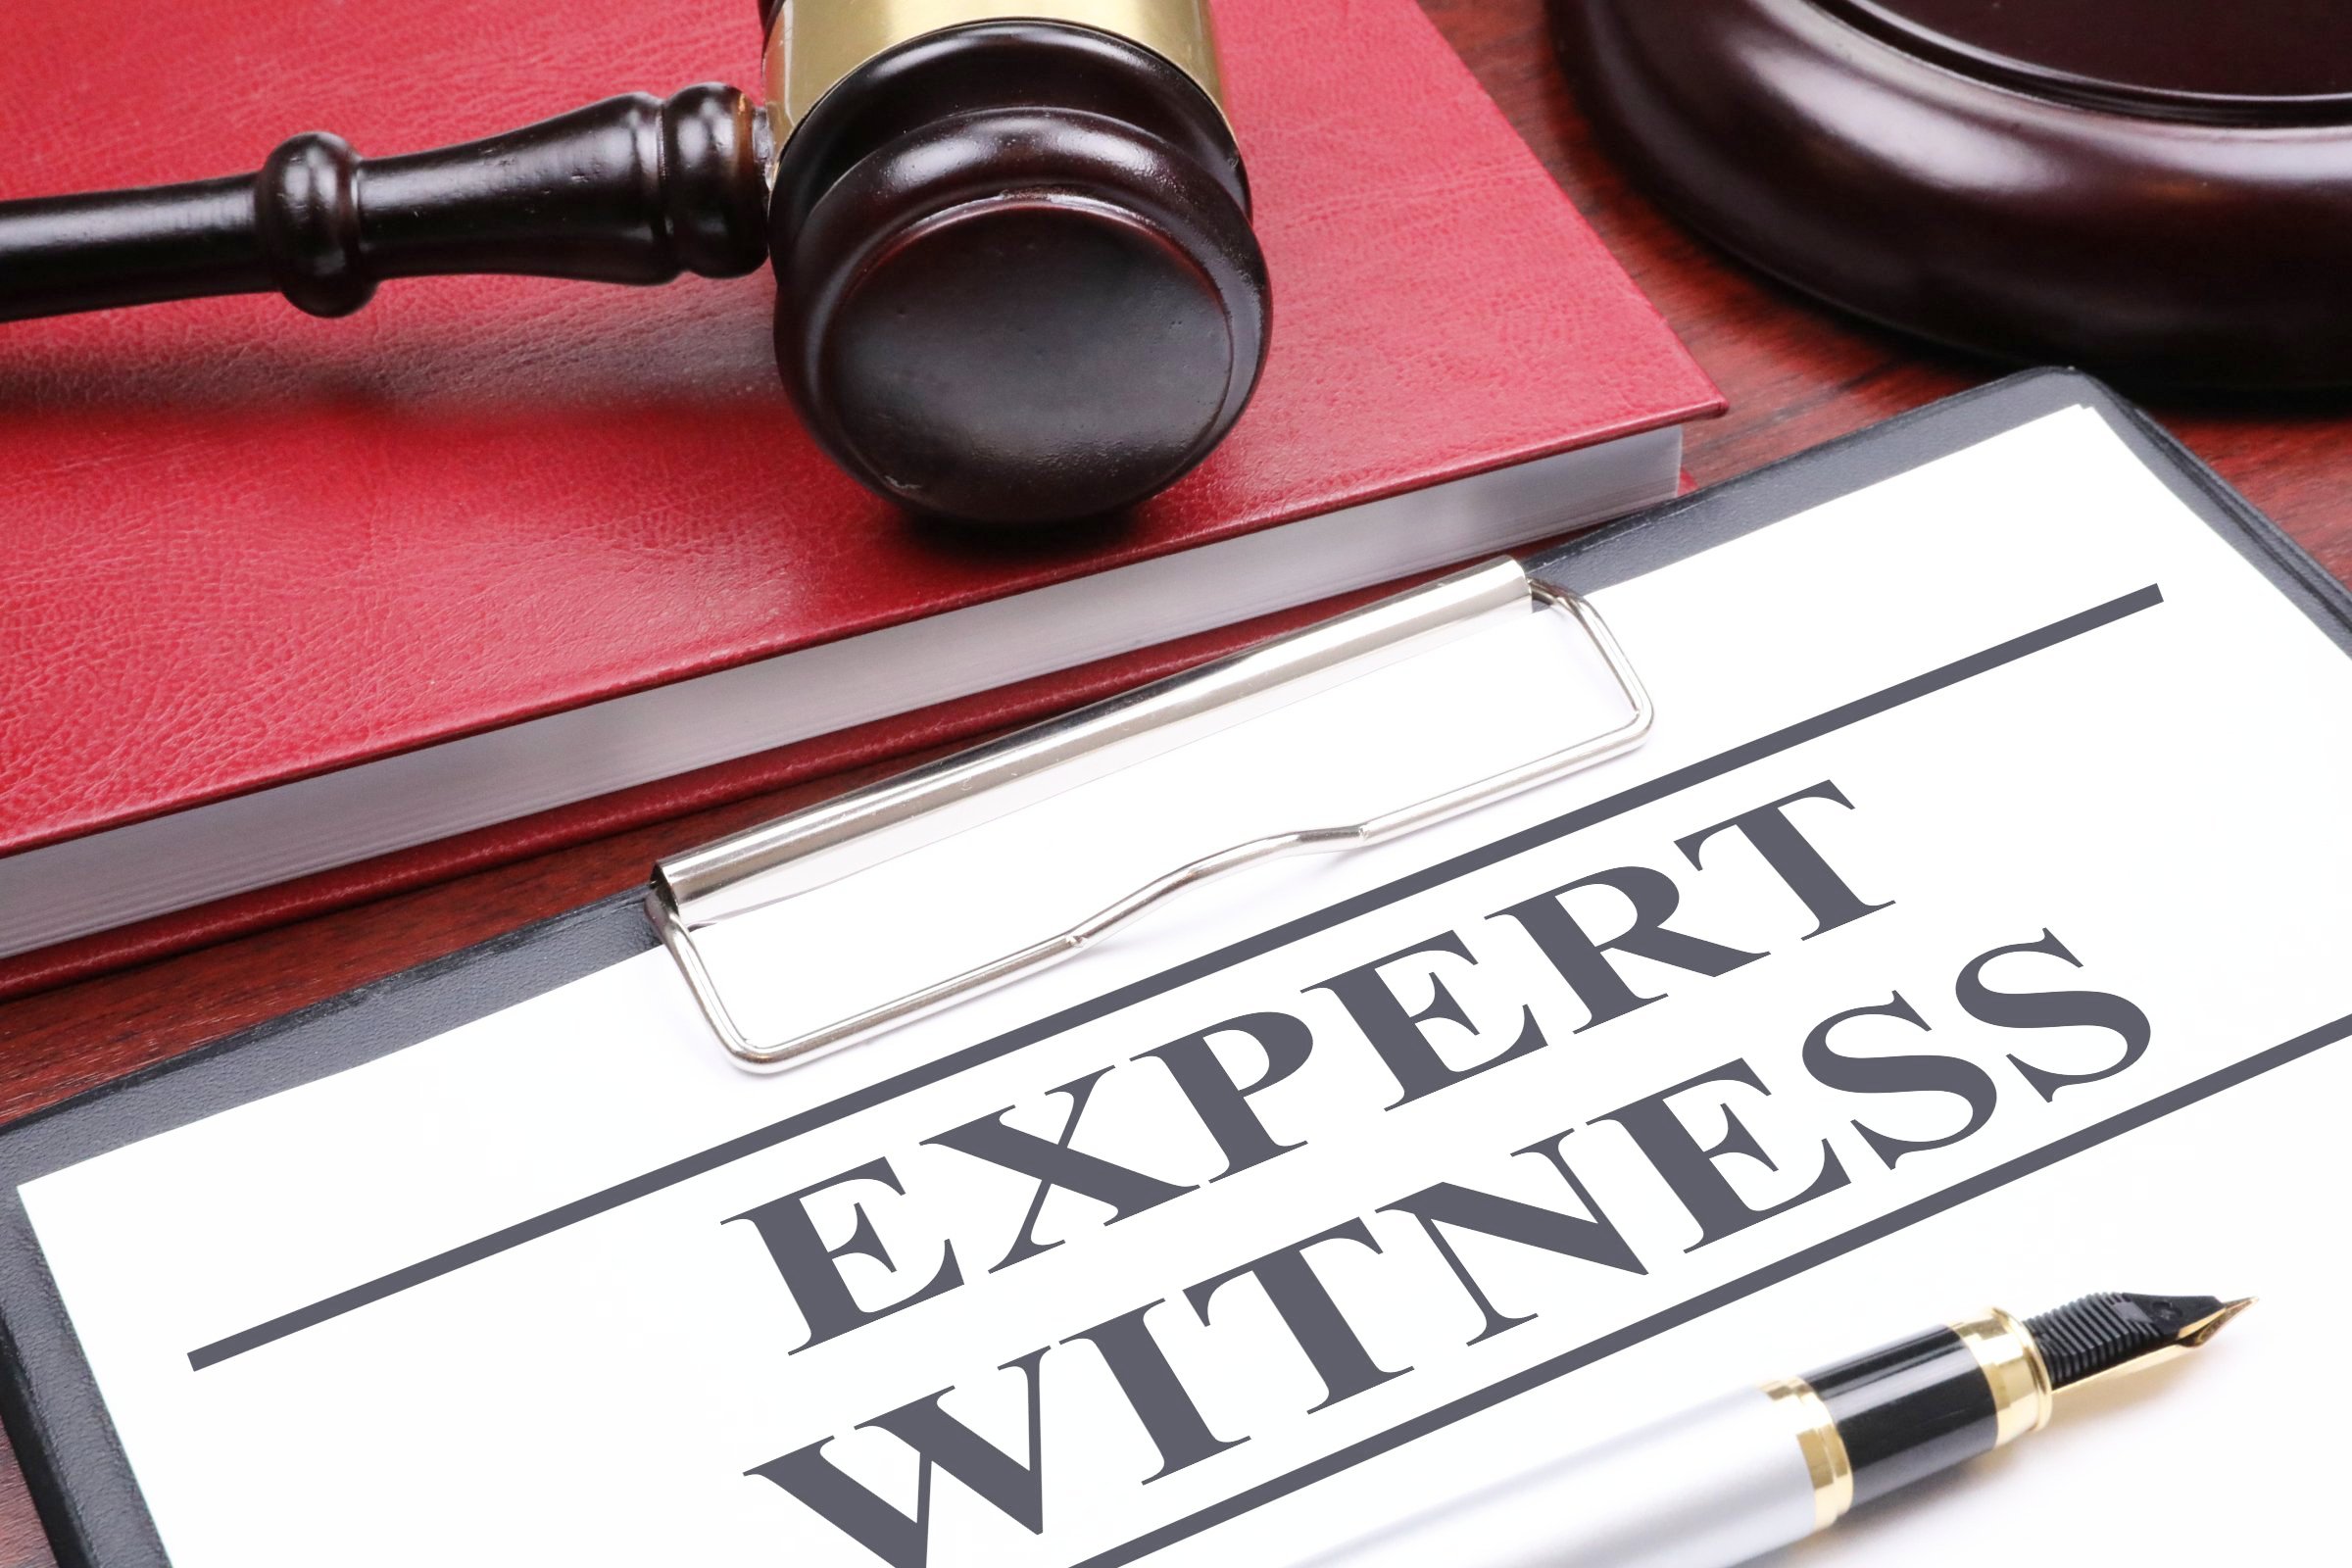 Understanding the role, and limitations, governing expert witnesses in licencing matters